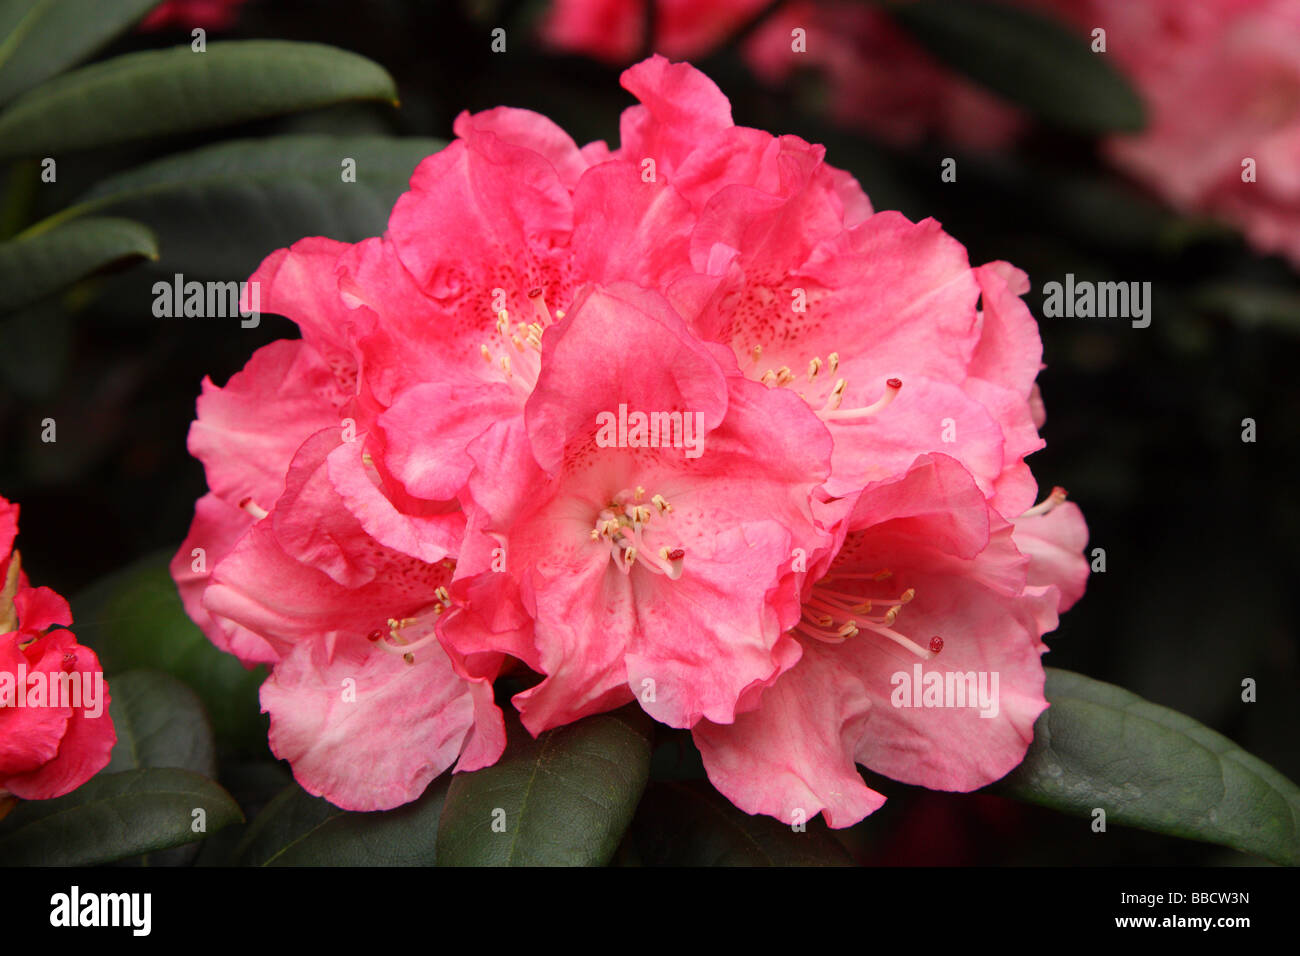 Pink rhododendron flowers close up Rhododendron 'Ann Lindsay' Stock Photo